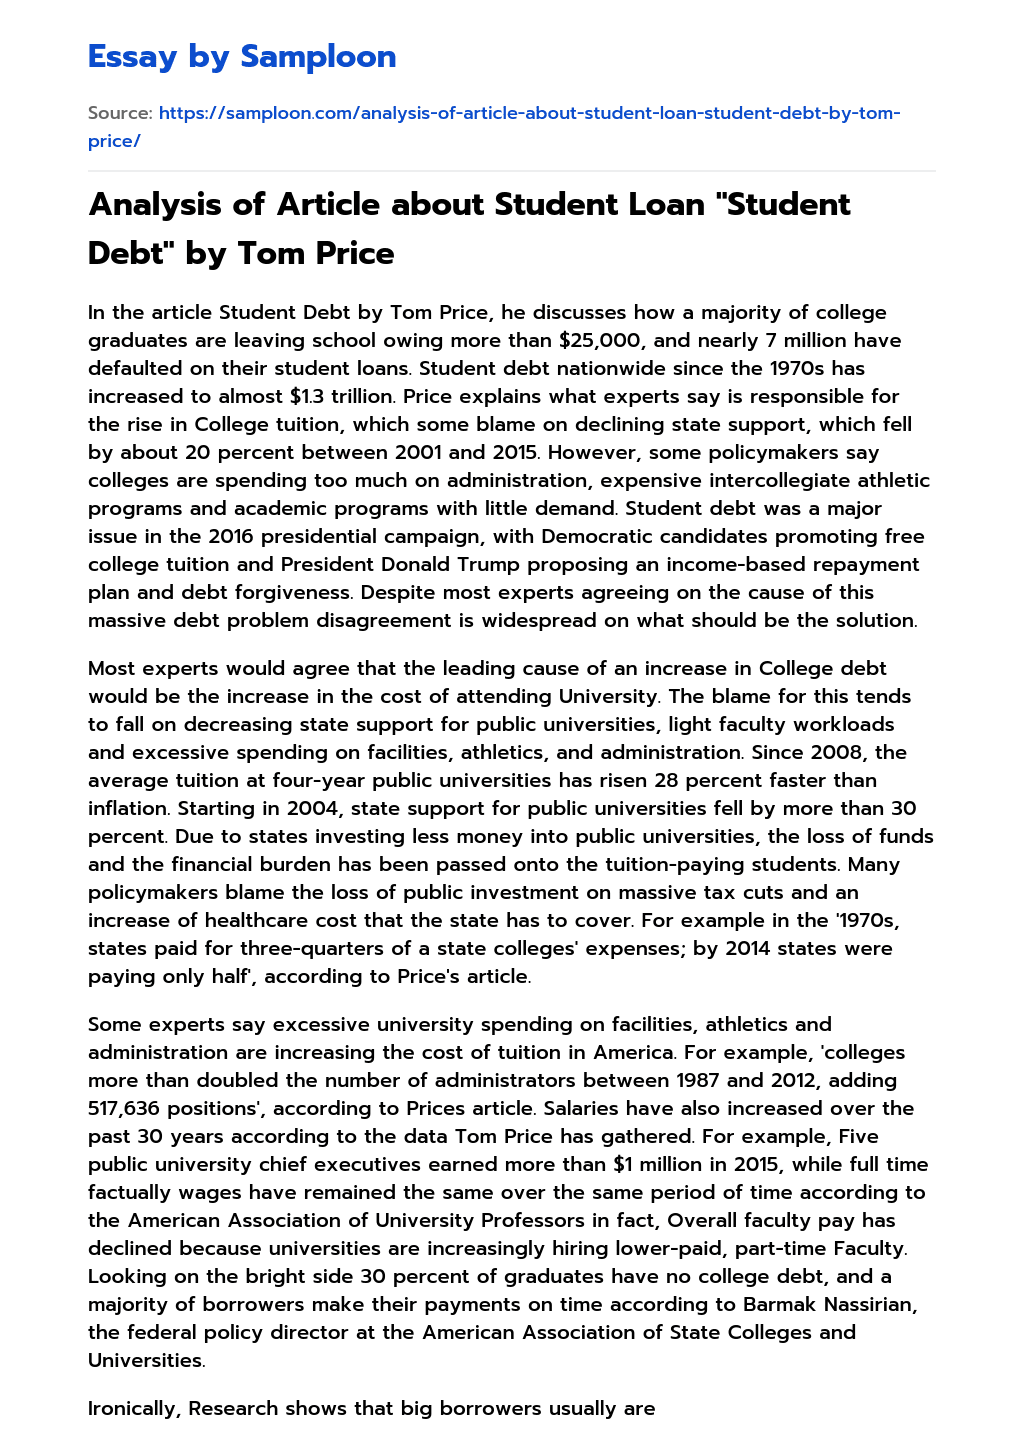 Analysis of Article about Student Loan “Student Debt” by Tom Price essay